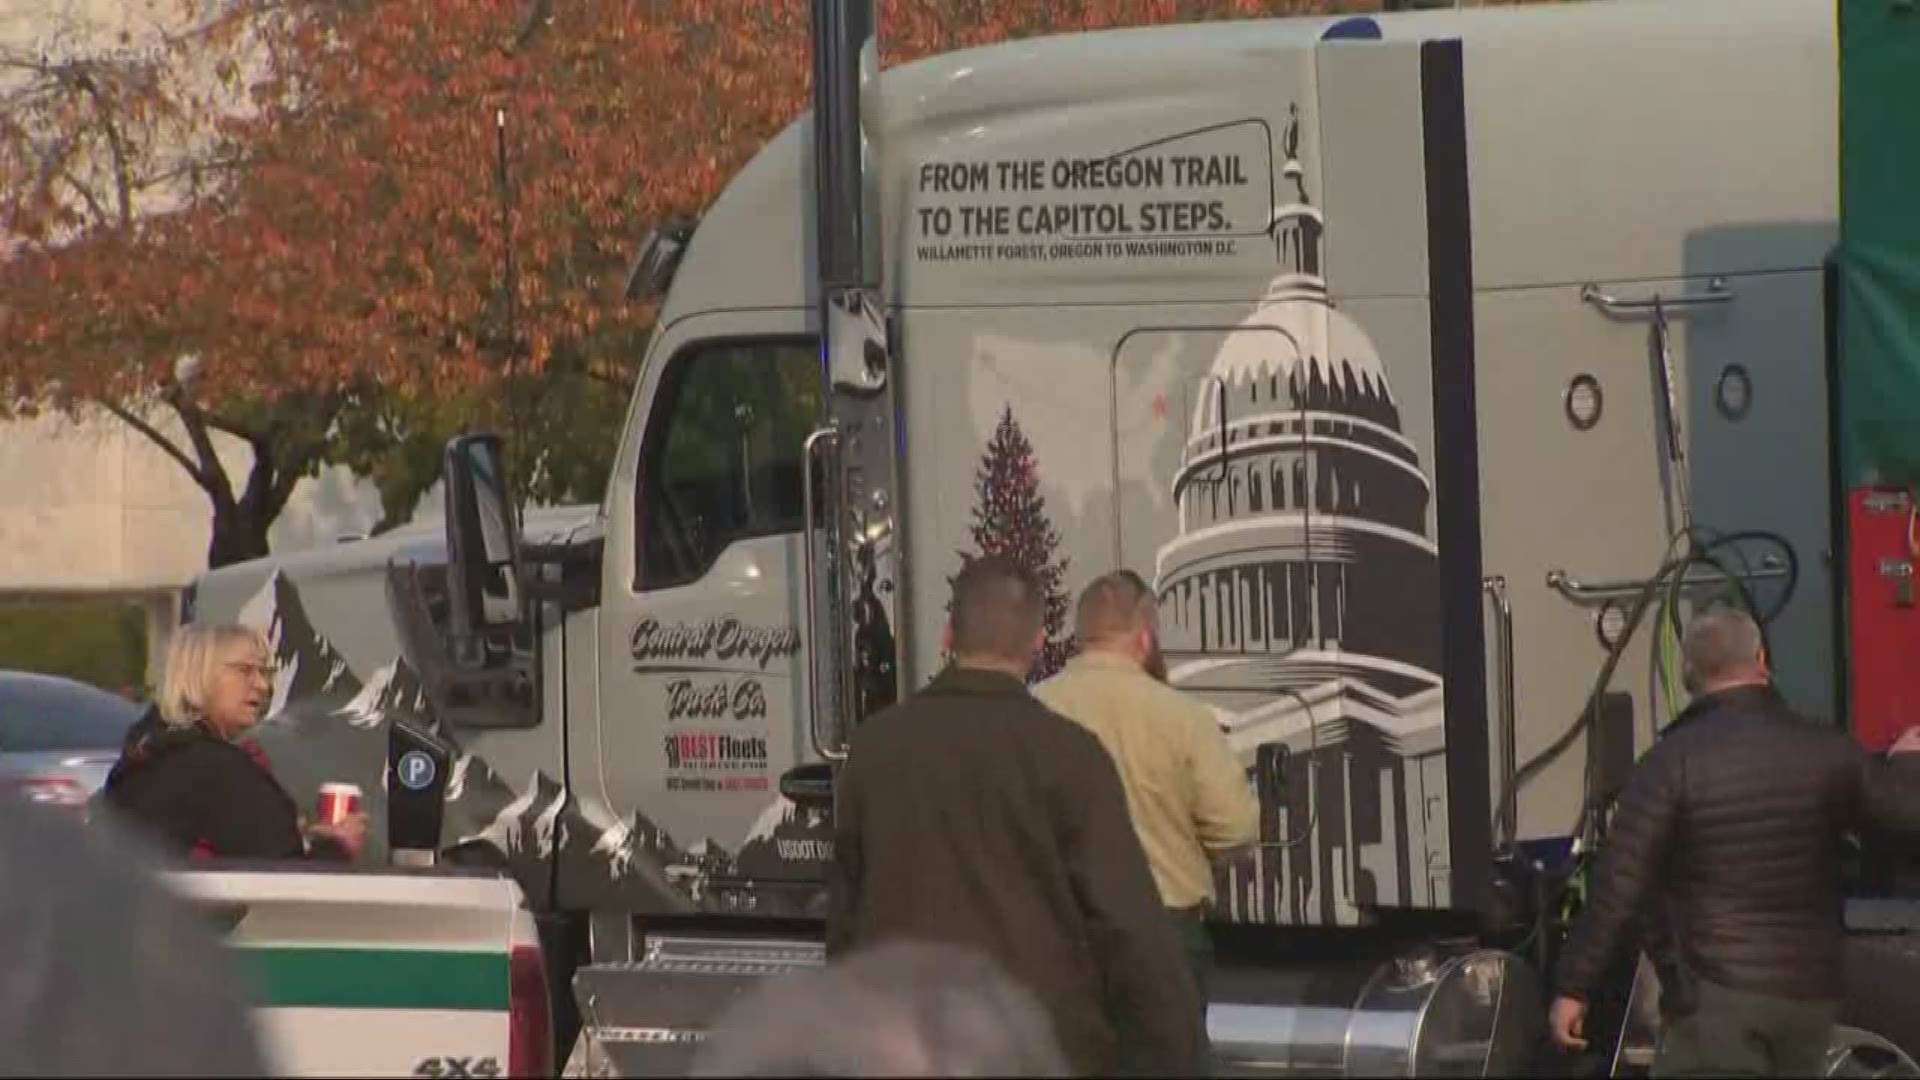 An 80-foot noble fir cut down in the Willamette National Forest is on a rock-star worthy tour to the nation's capital. The tree made a stop in Salem Tuesday.